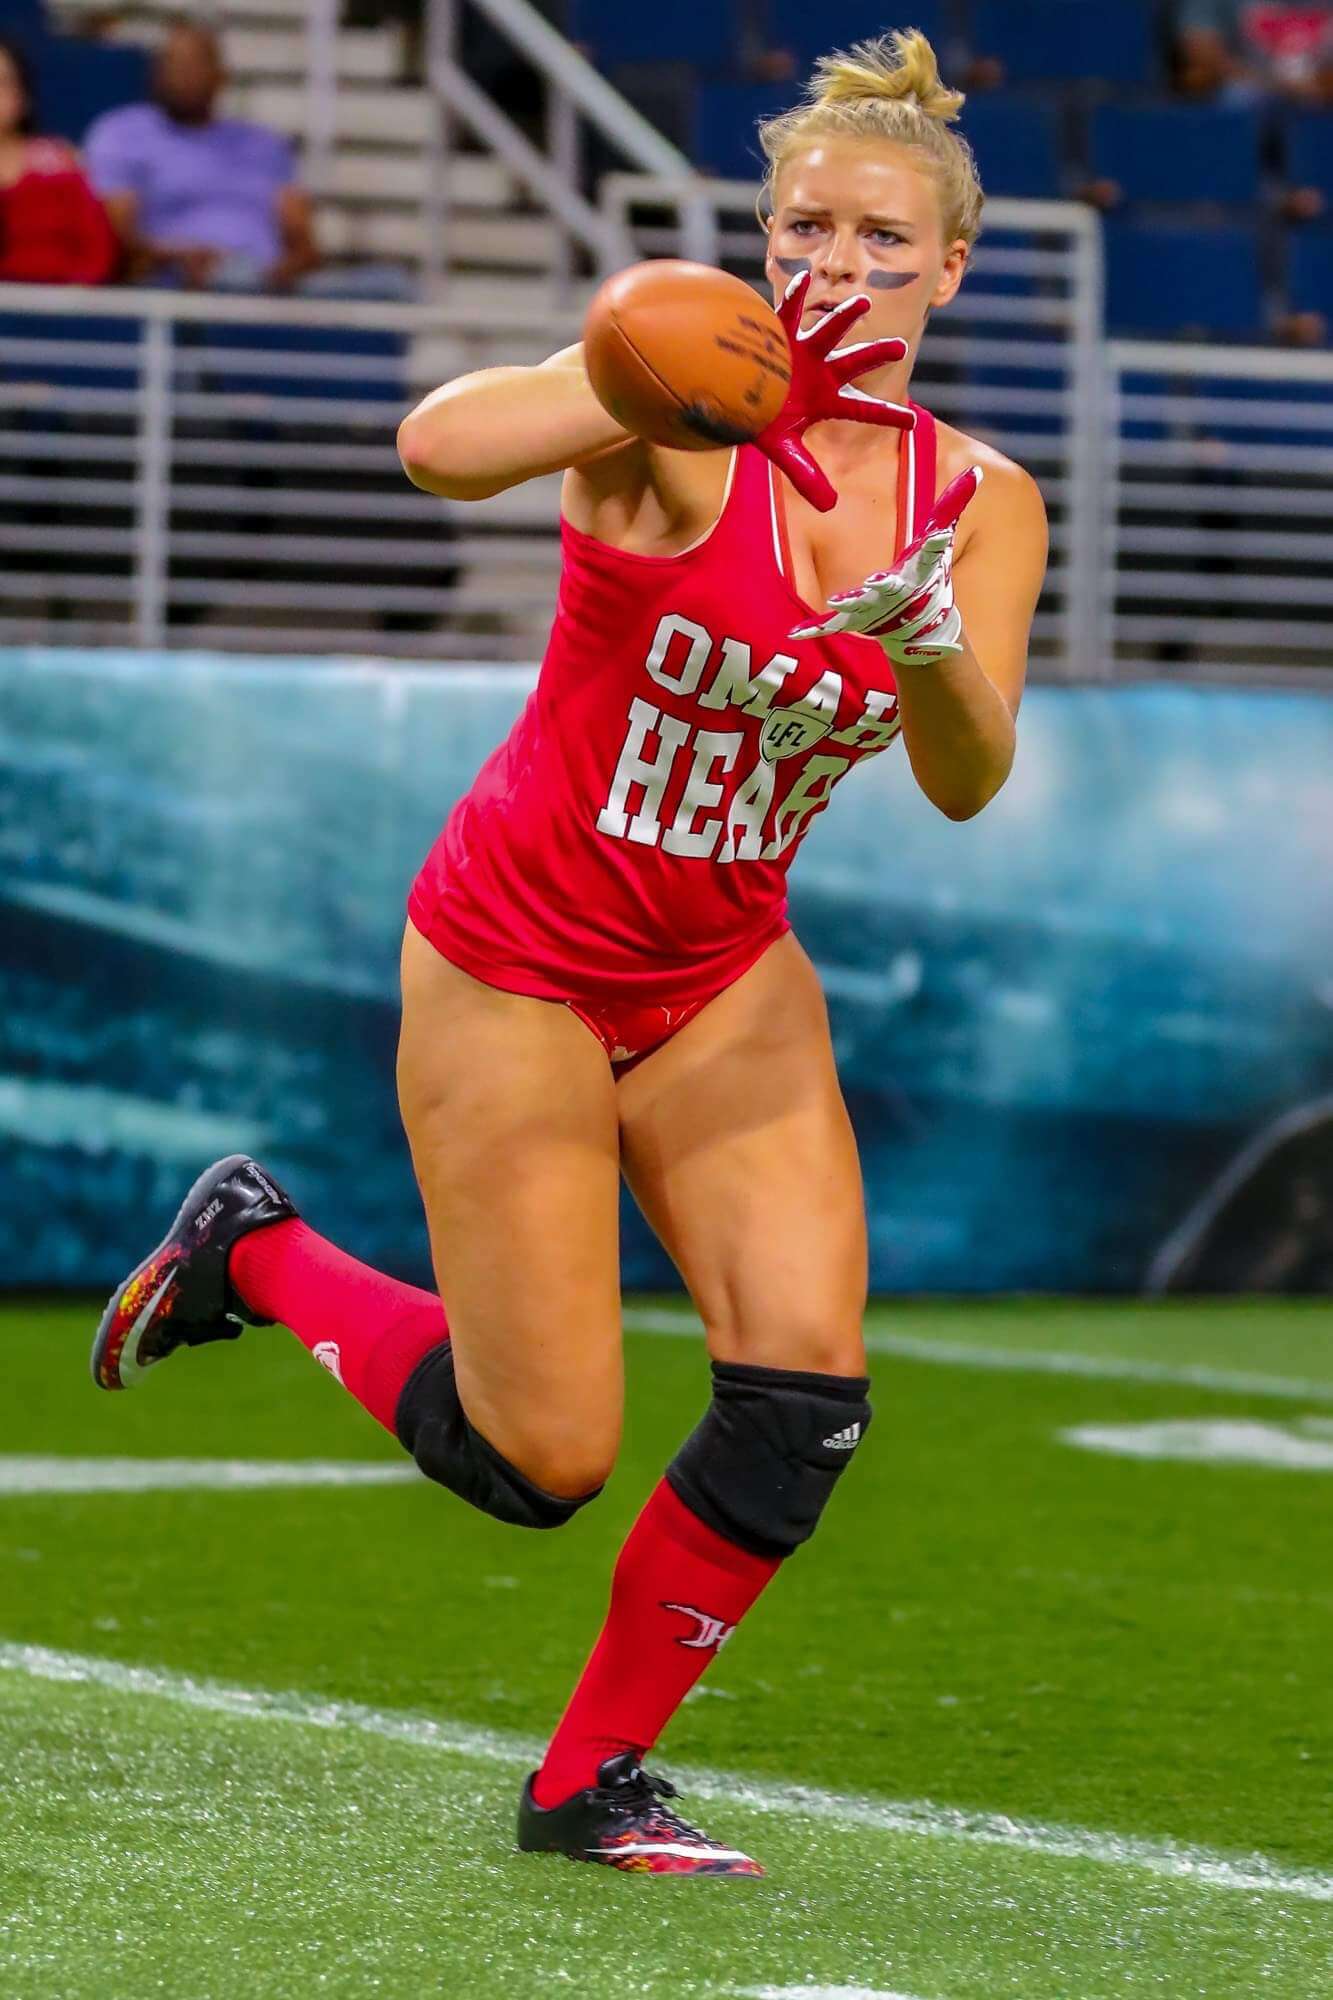 The Legends Football League Beautiful Women And Football, Need We Say Anymore! 158